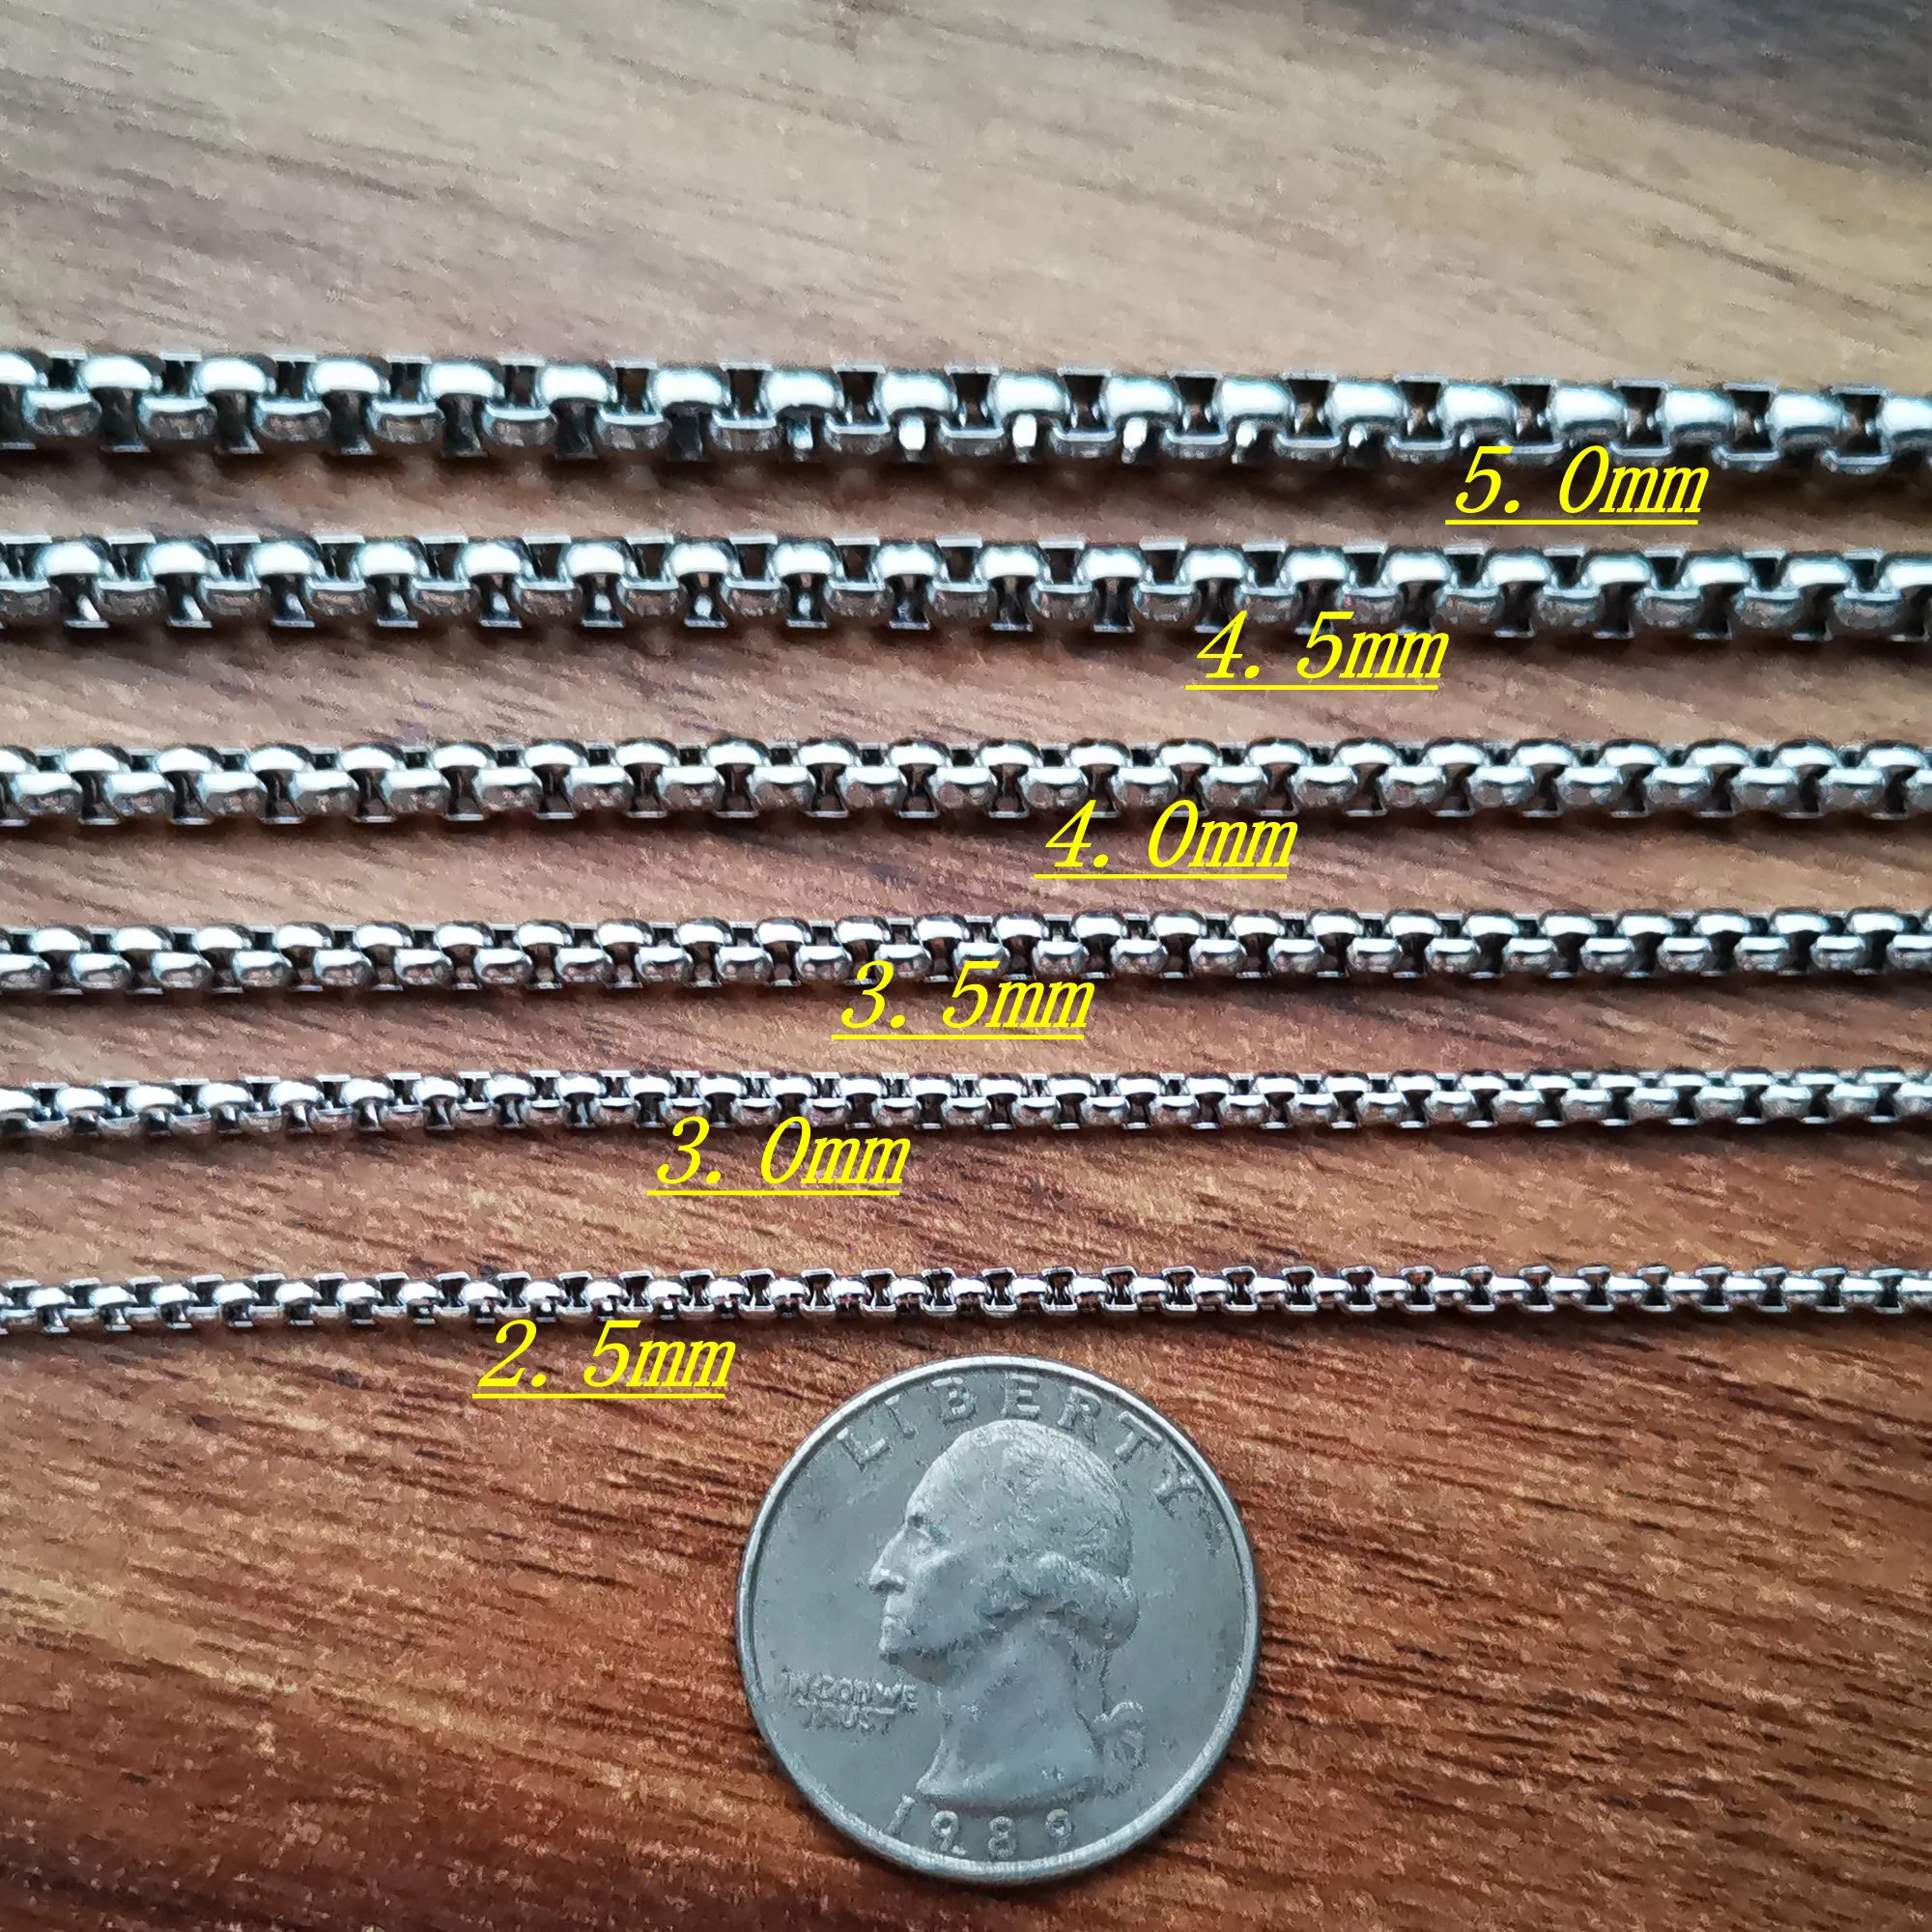 10meter in bulk 2.5mm/3mm//3.5mm/4mm/4.5mm/5mm stainless steel silver square Rolo chain box Link chain findings jewelry findings DIY Chain